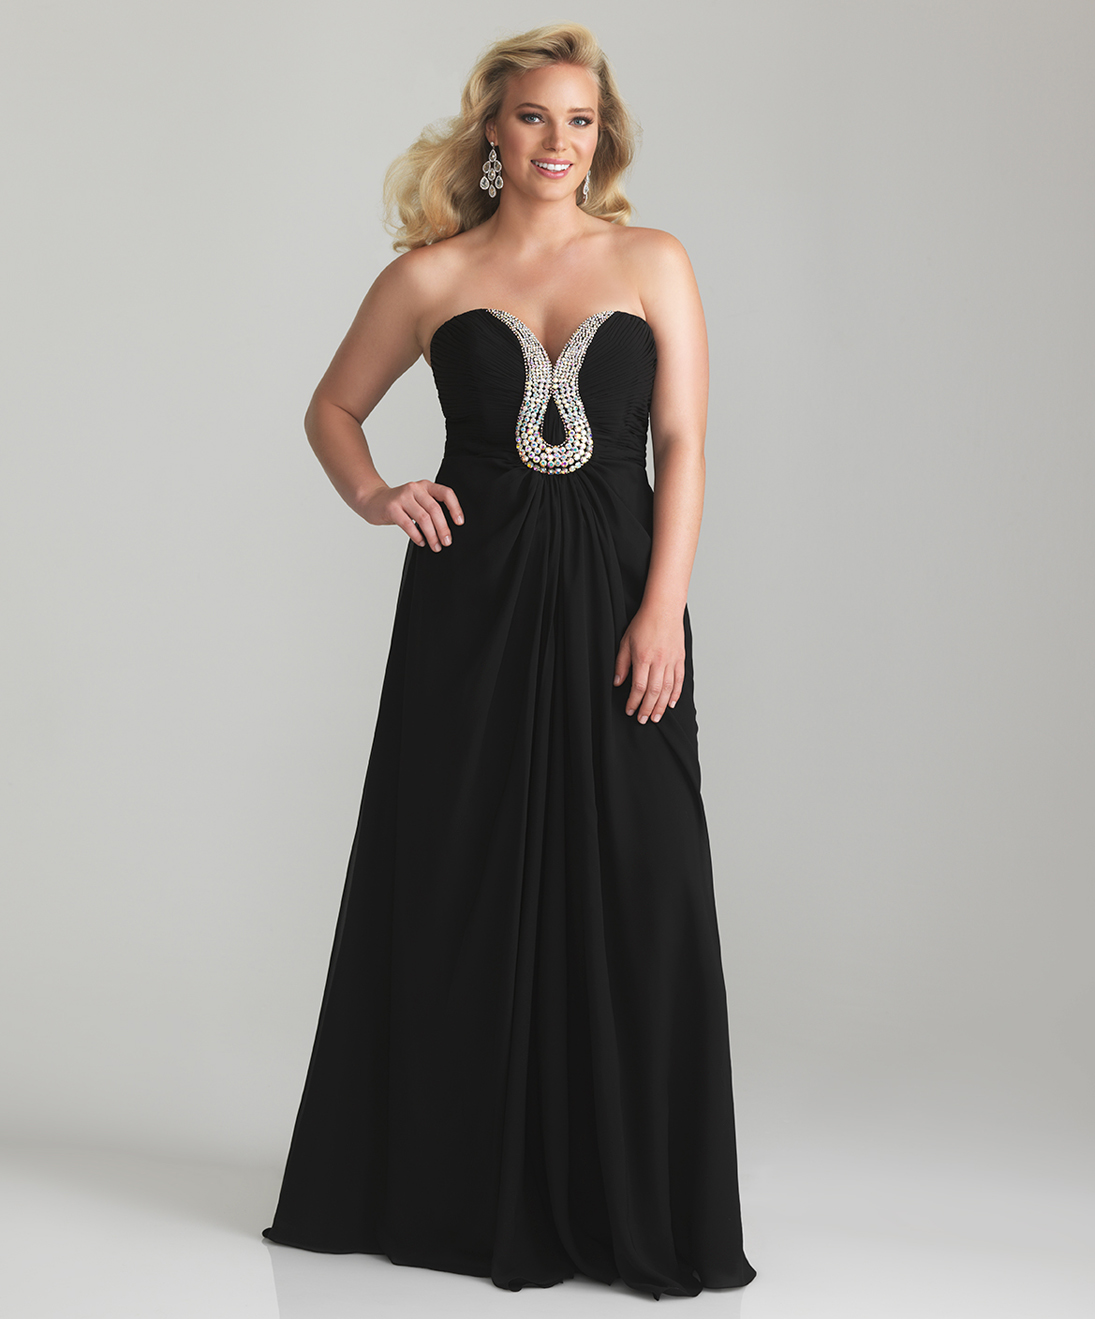 Plus Size Party Wear Dresses For This Year Xmas